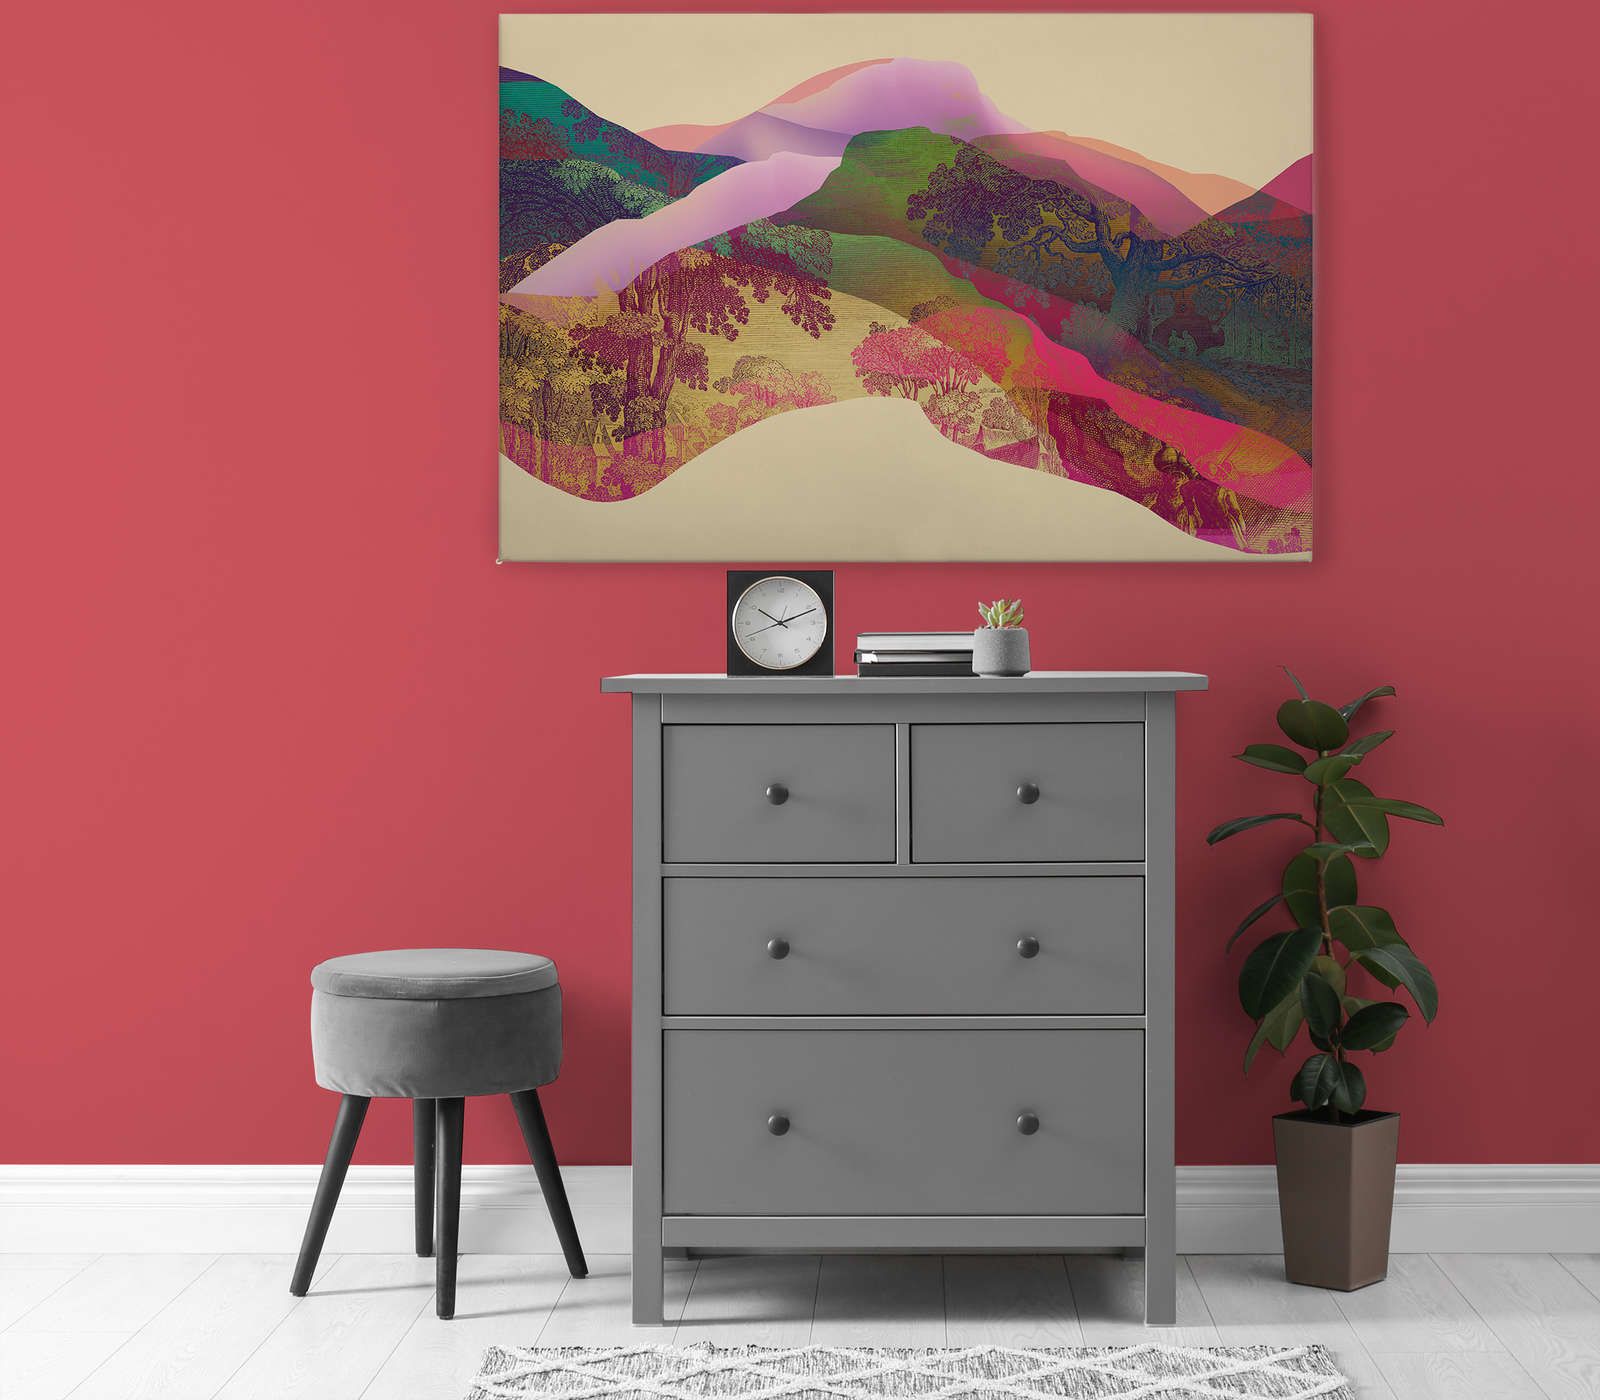             Magic Mountain 2 - Canvas painting Mountain landscape abstract - 1.20 m x 0.80 m
        